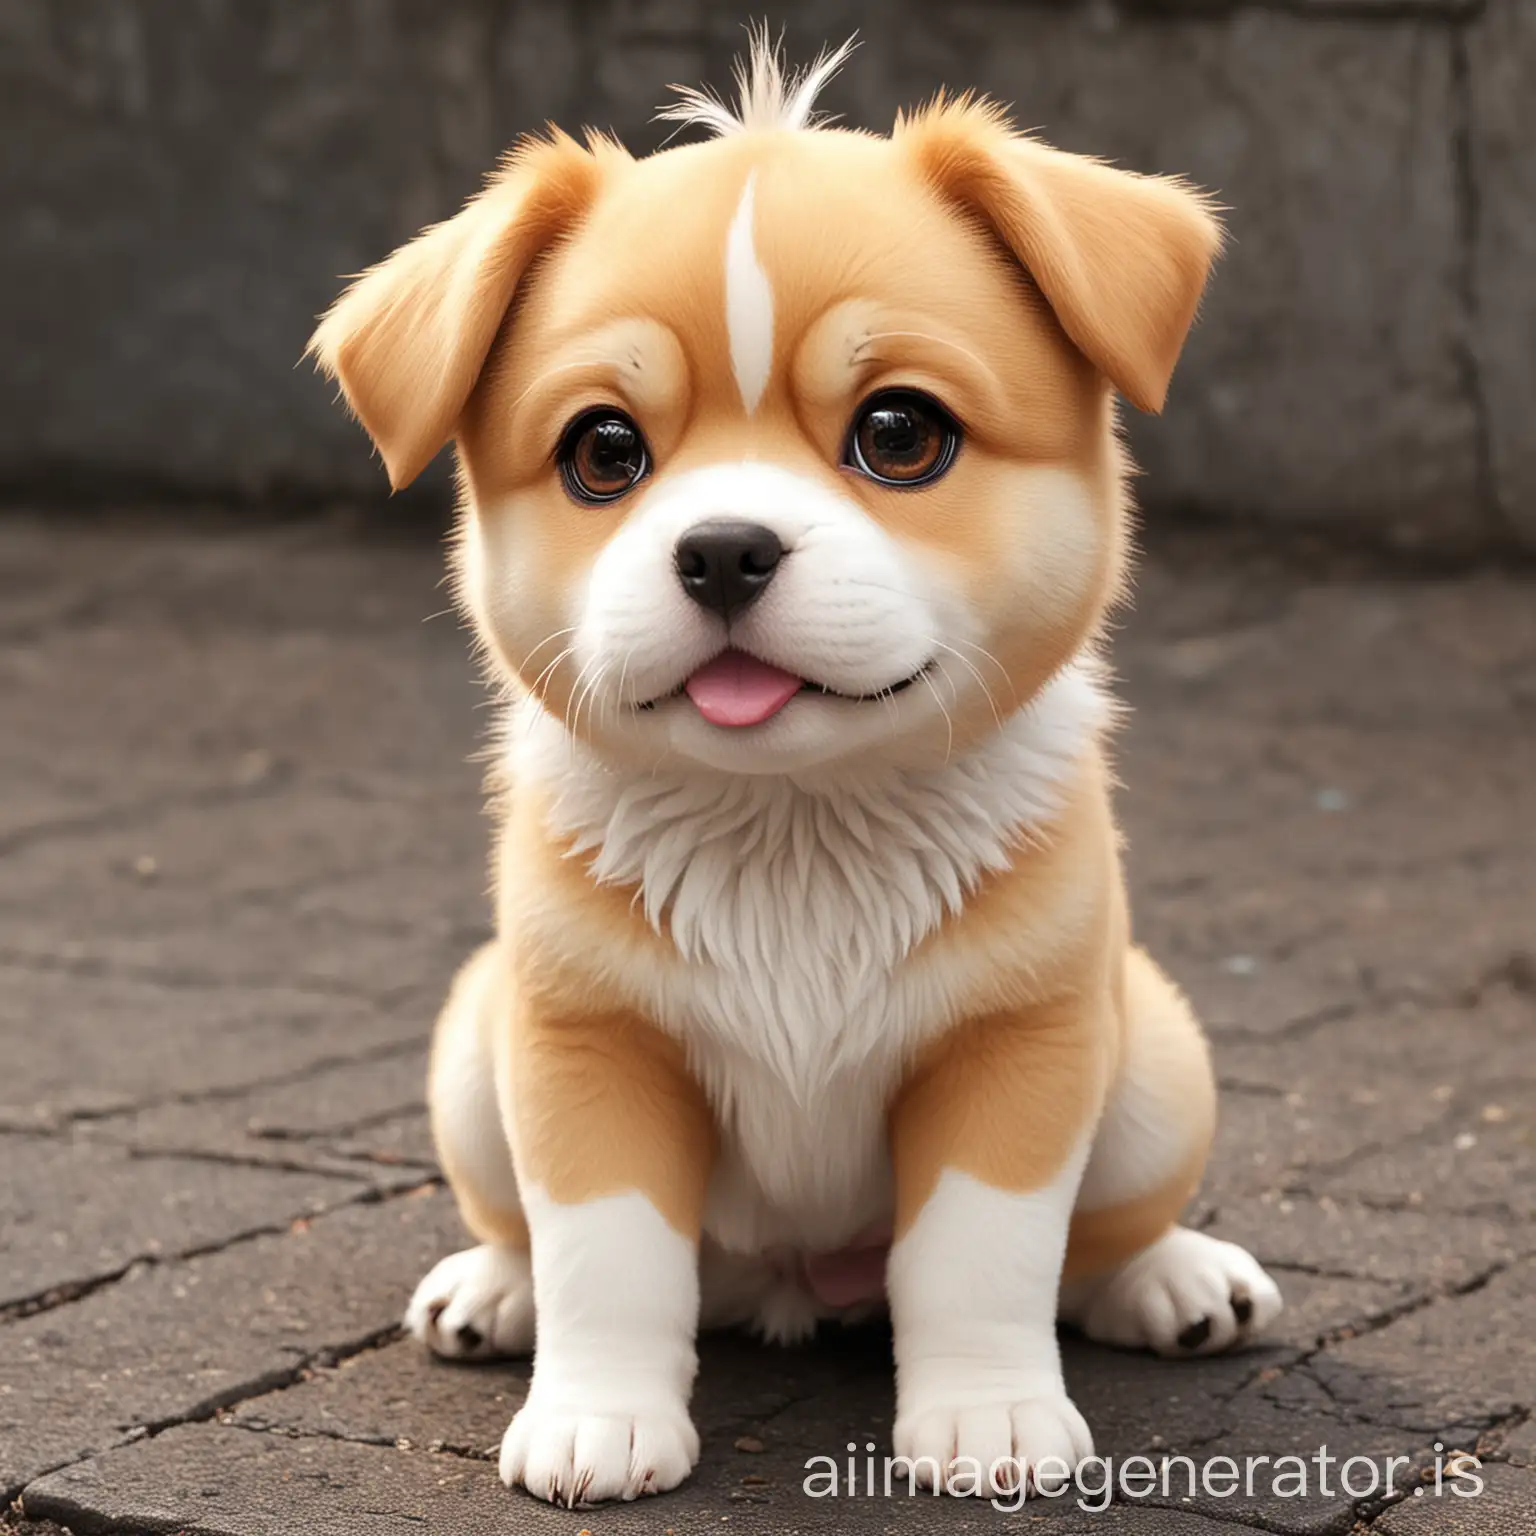 Cute-Anime-Dog-with-Sparkling-Eyes-and-Playful-Expression